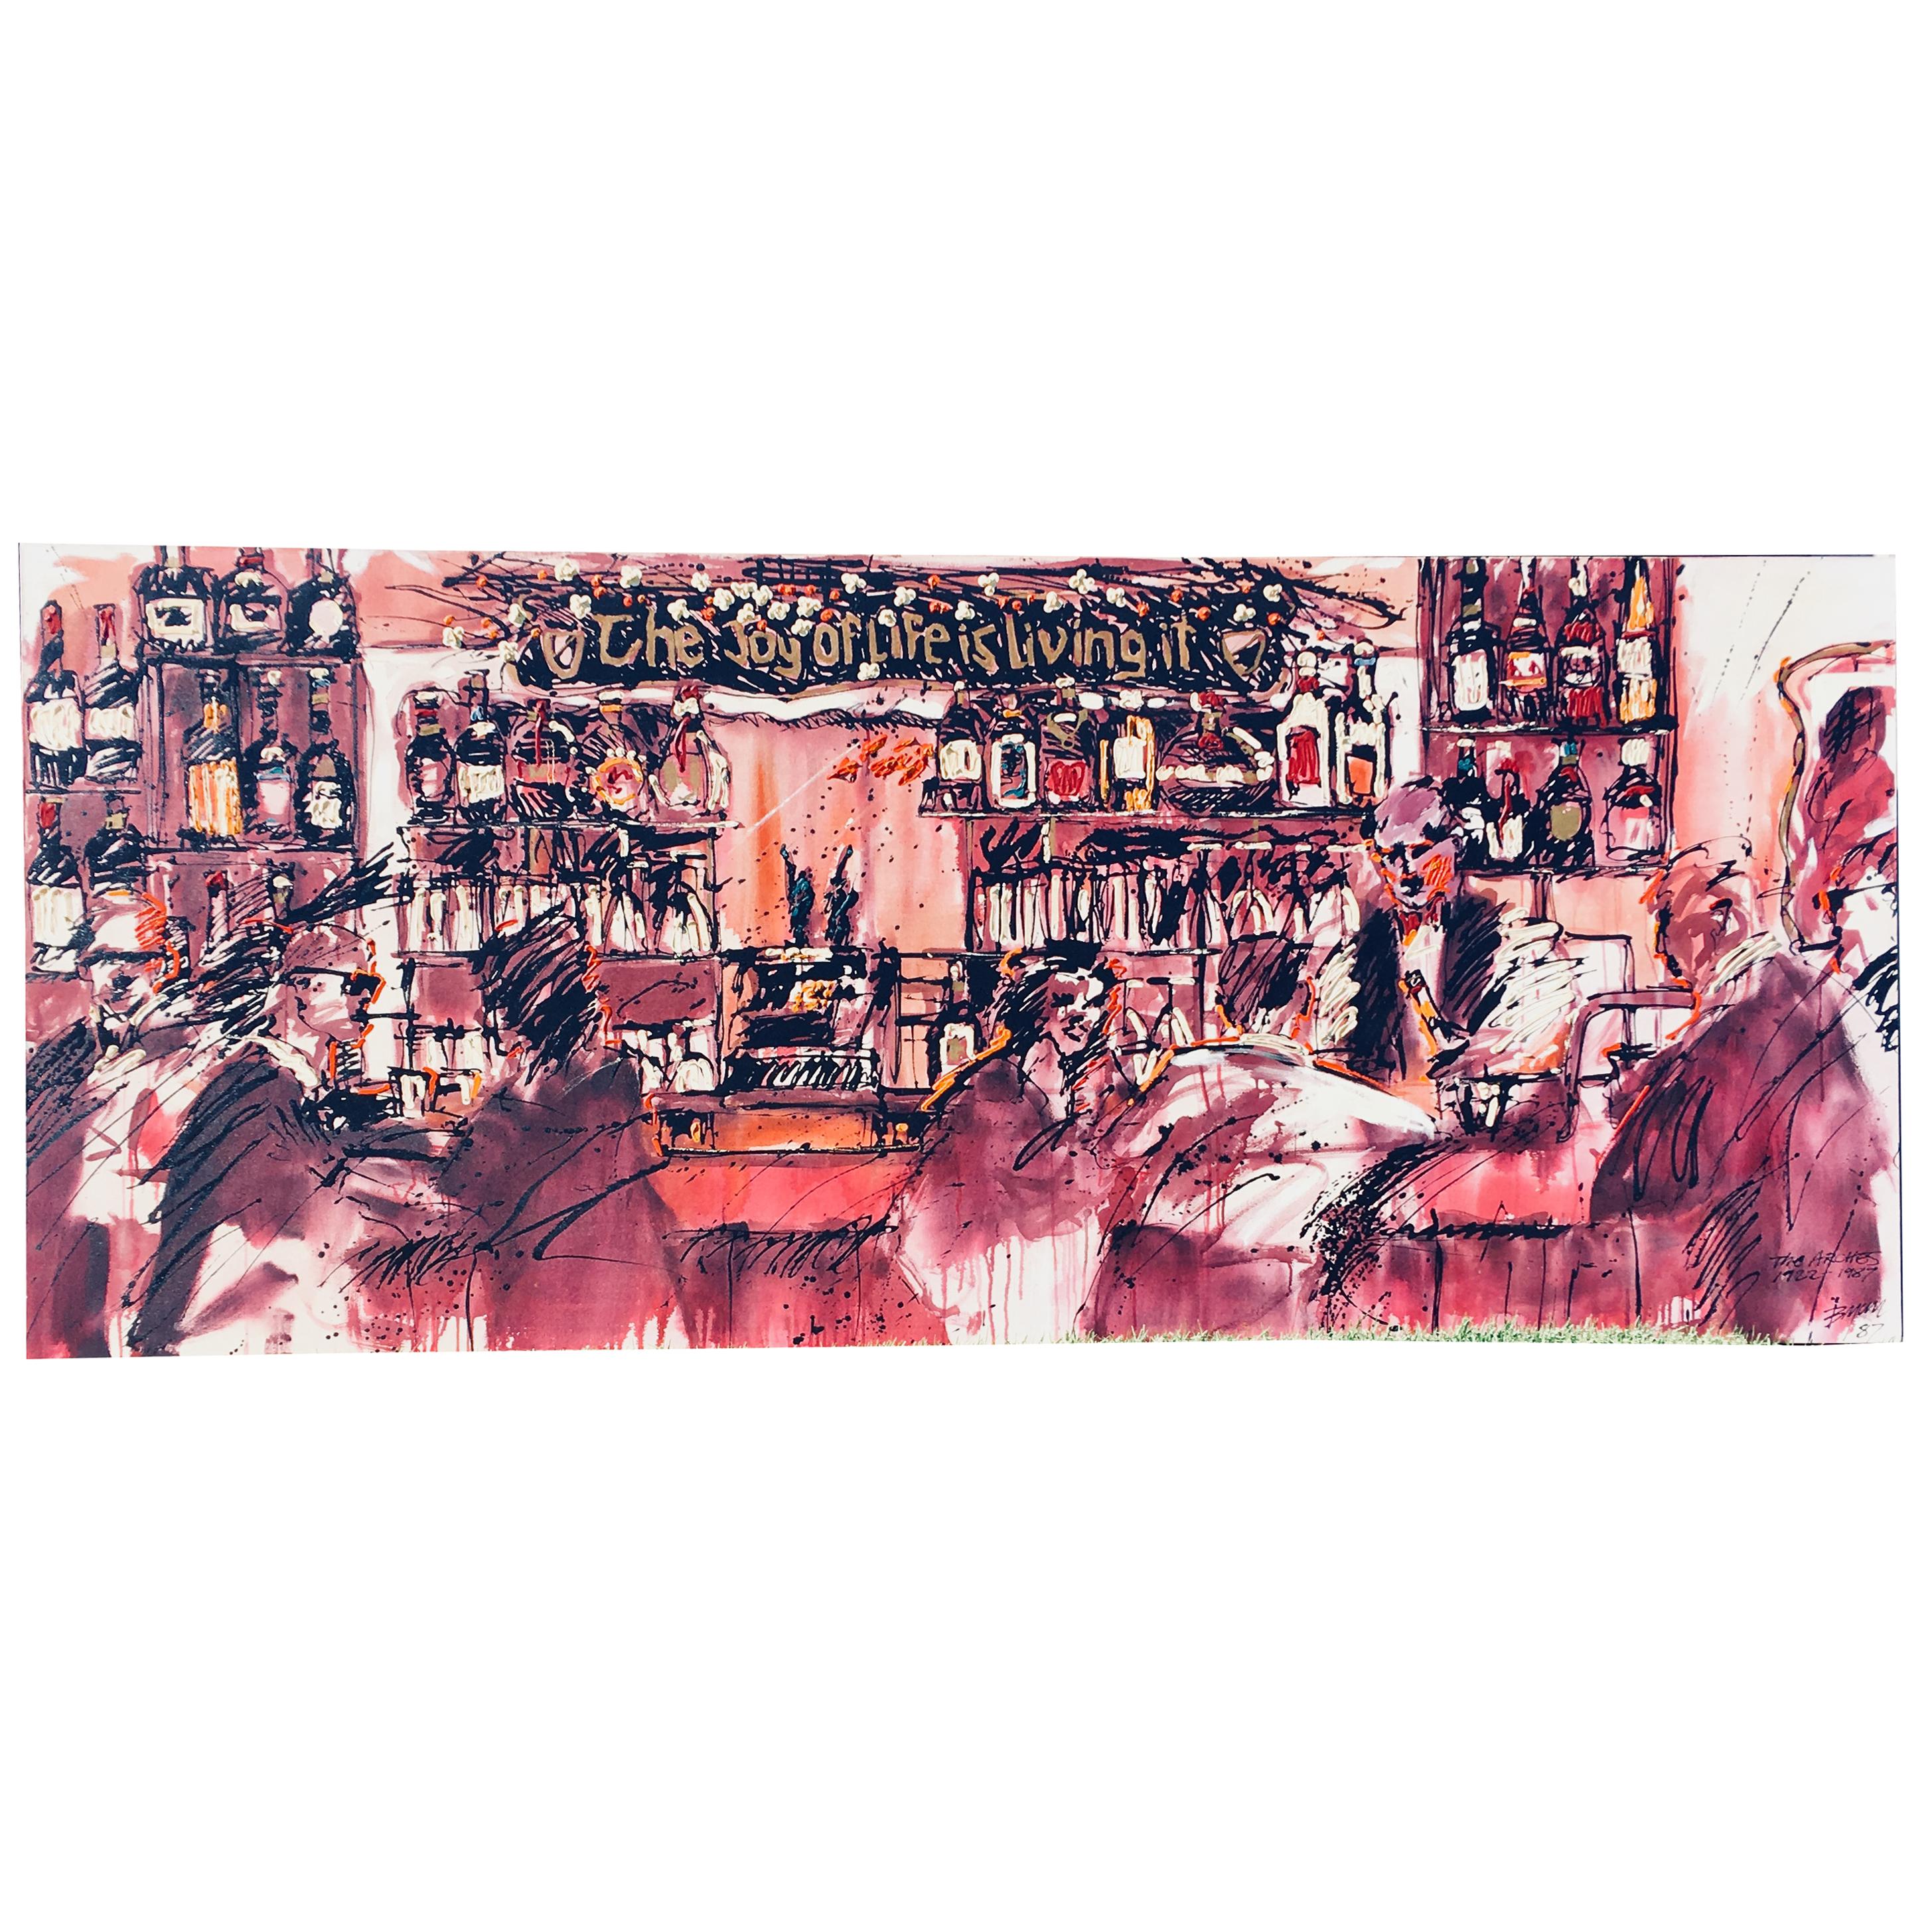 Iconic Huge Newport Beach Bar Painting "The Arches 1922-1987" by Michael Bryan